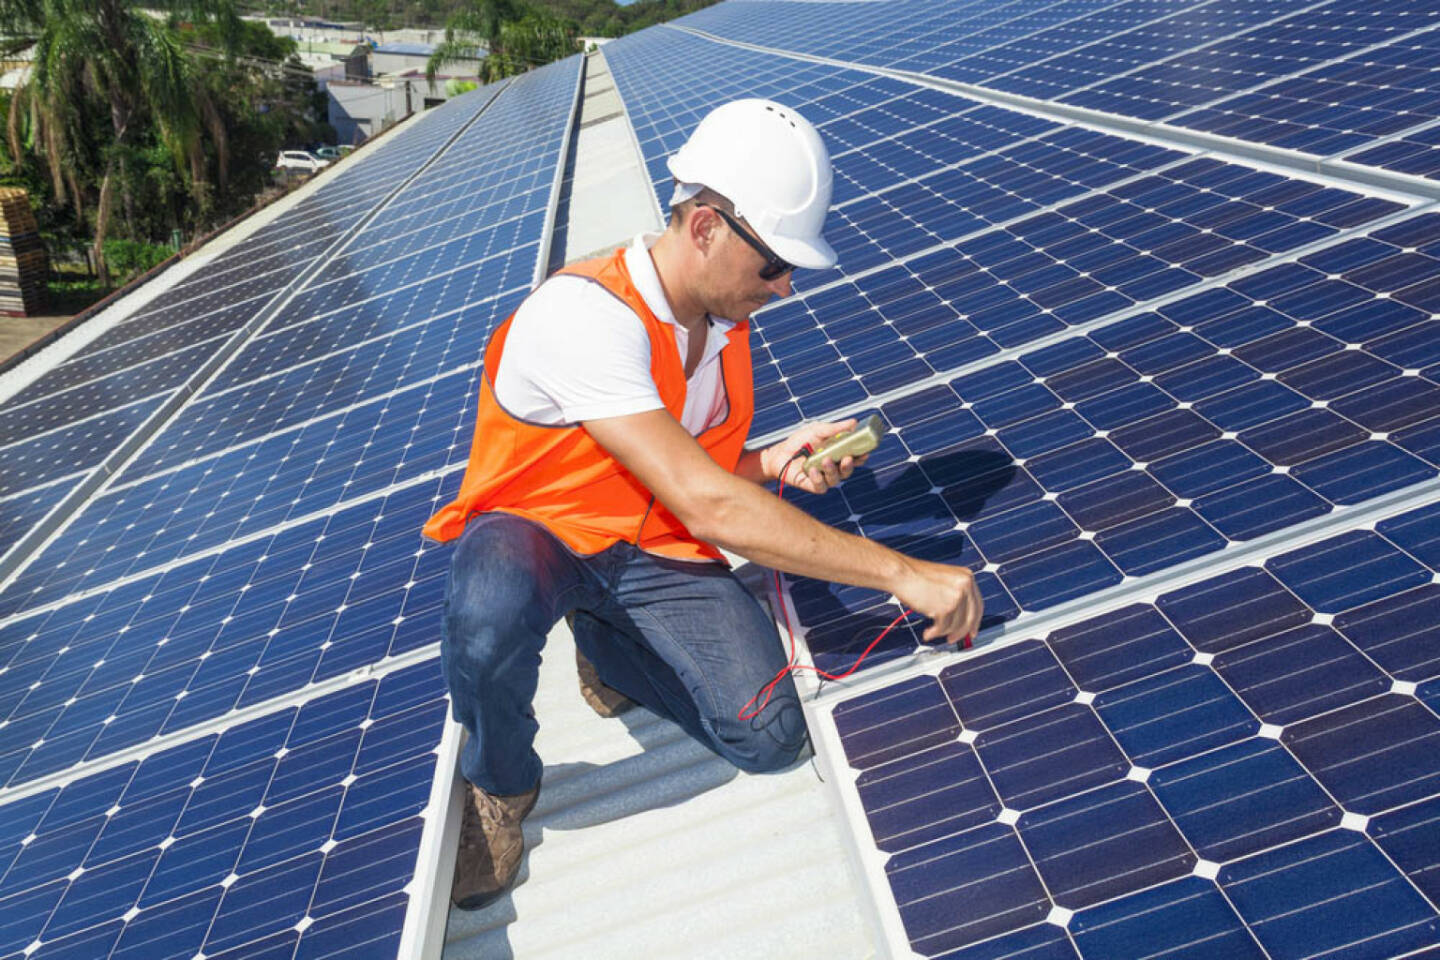 Solar, Energie, Montage, http://www.shutterstock.com/de/pic-148095986/stock-photo-young-technician-checking-solar-panels-on-factory-roof.html